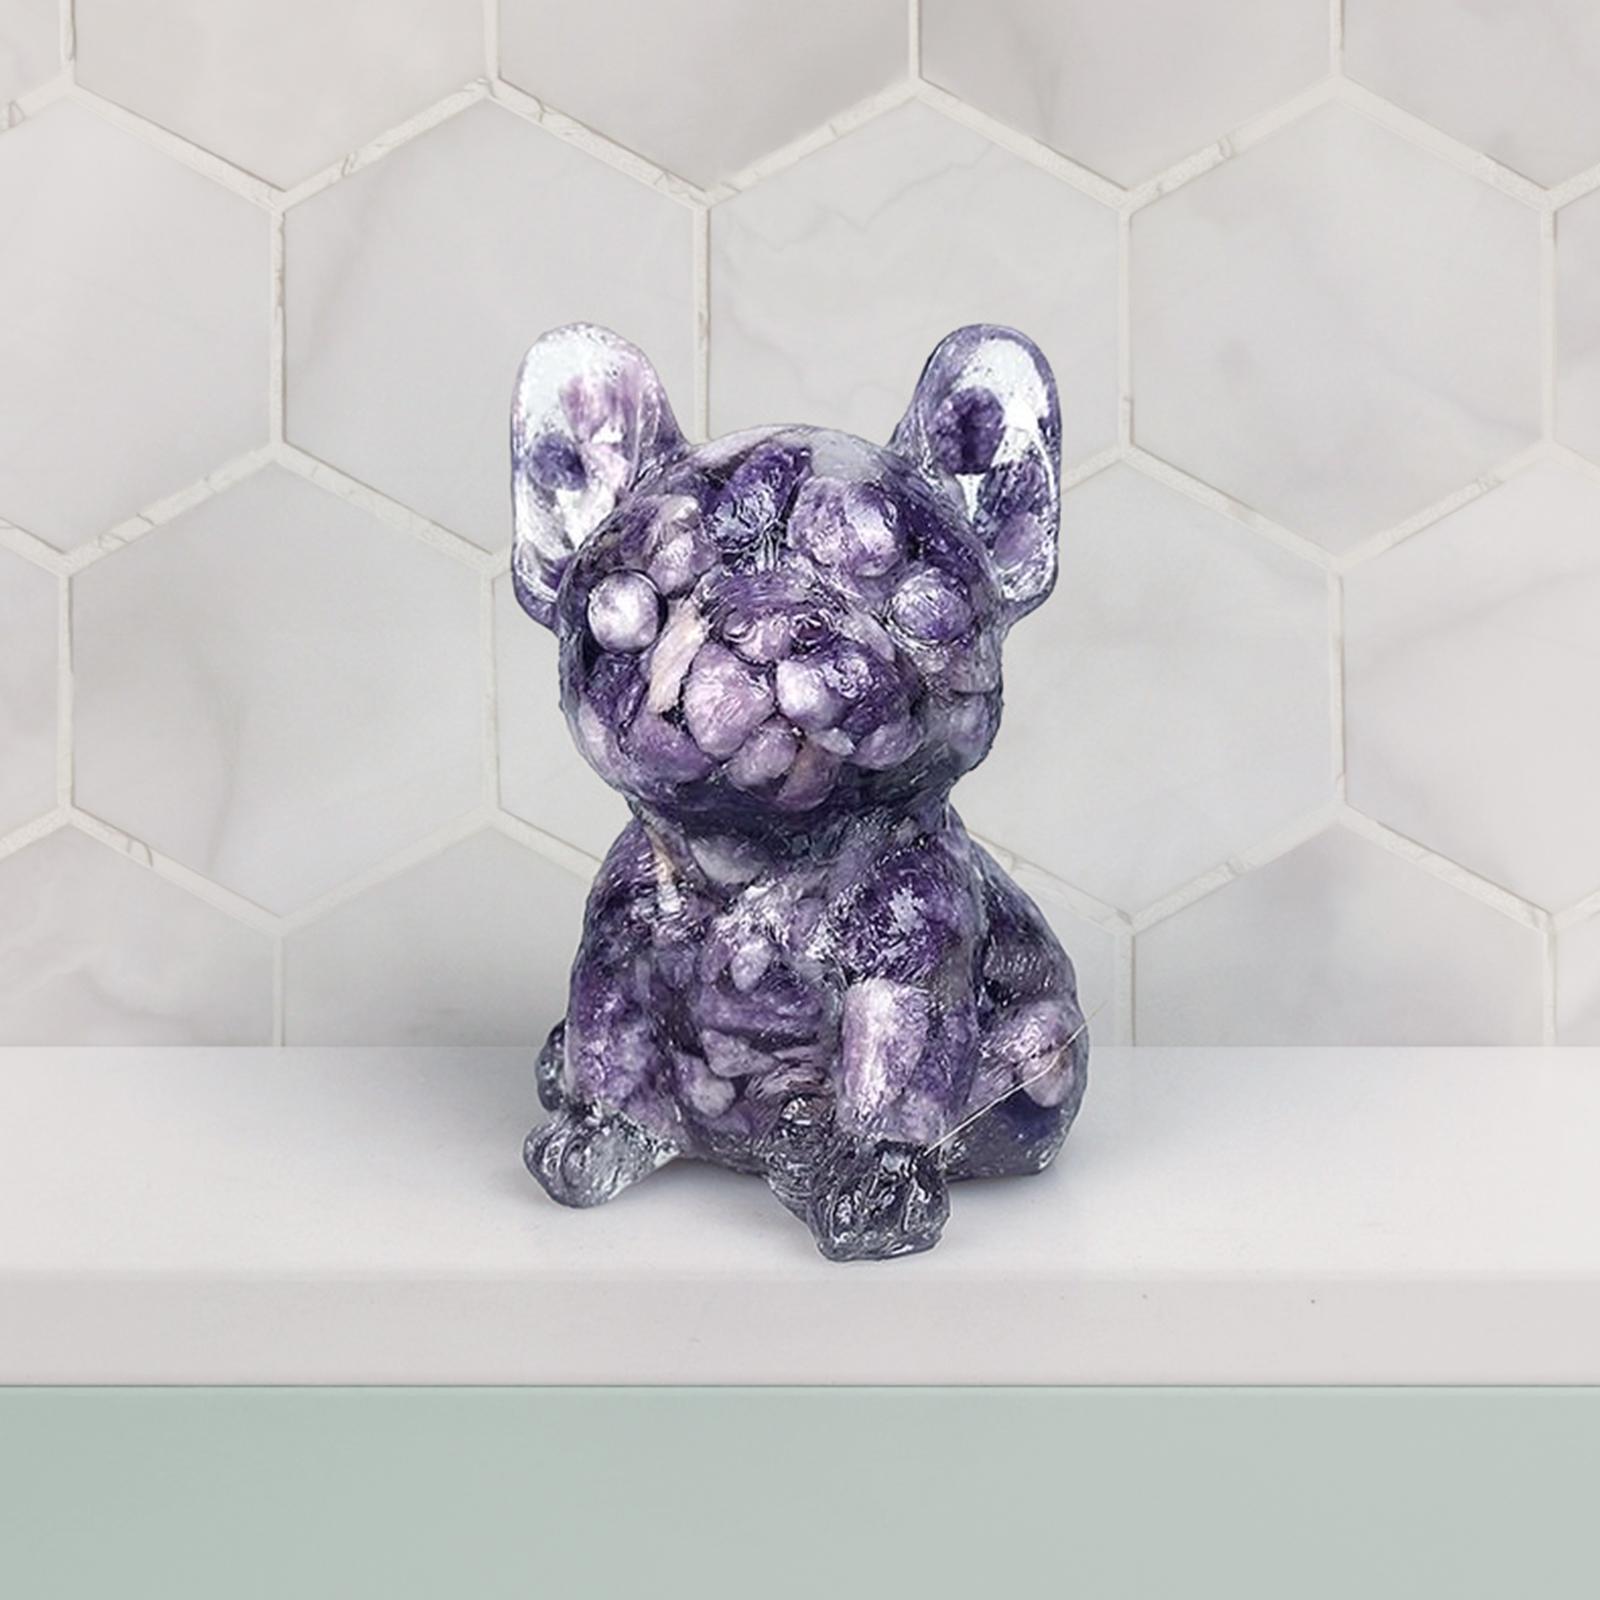 French Bulldog Figurine Ornament Small for Bedroom Desktop Collectible Violet